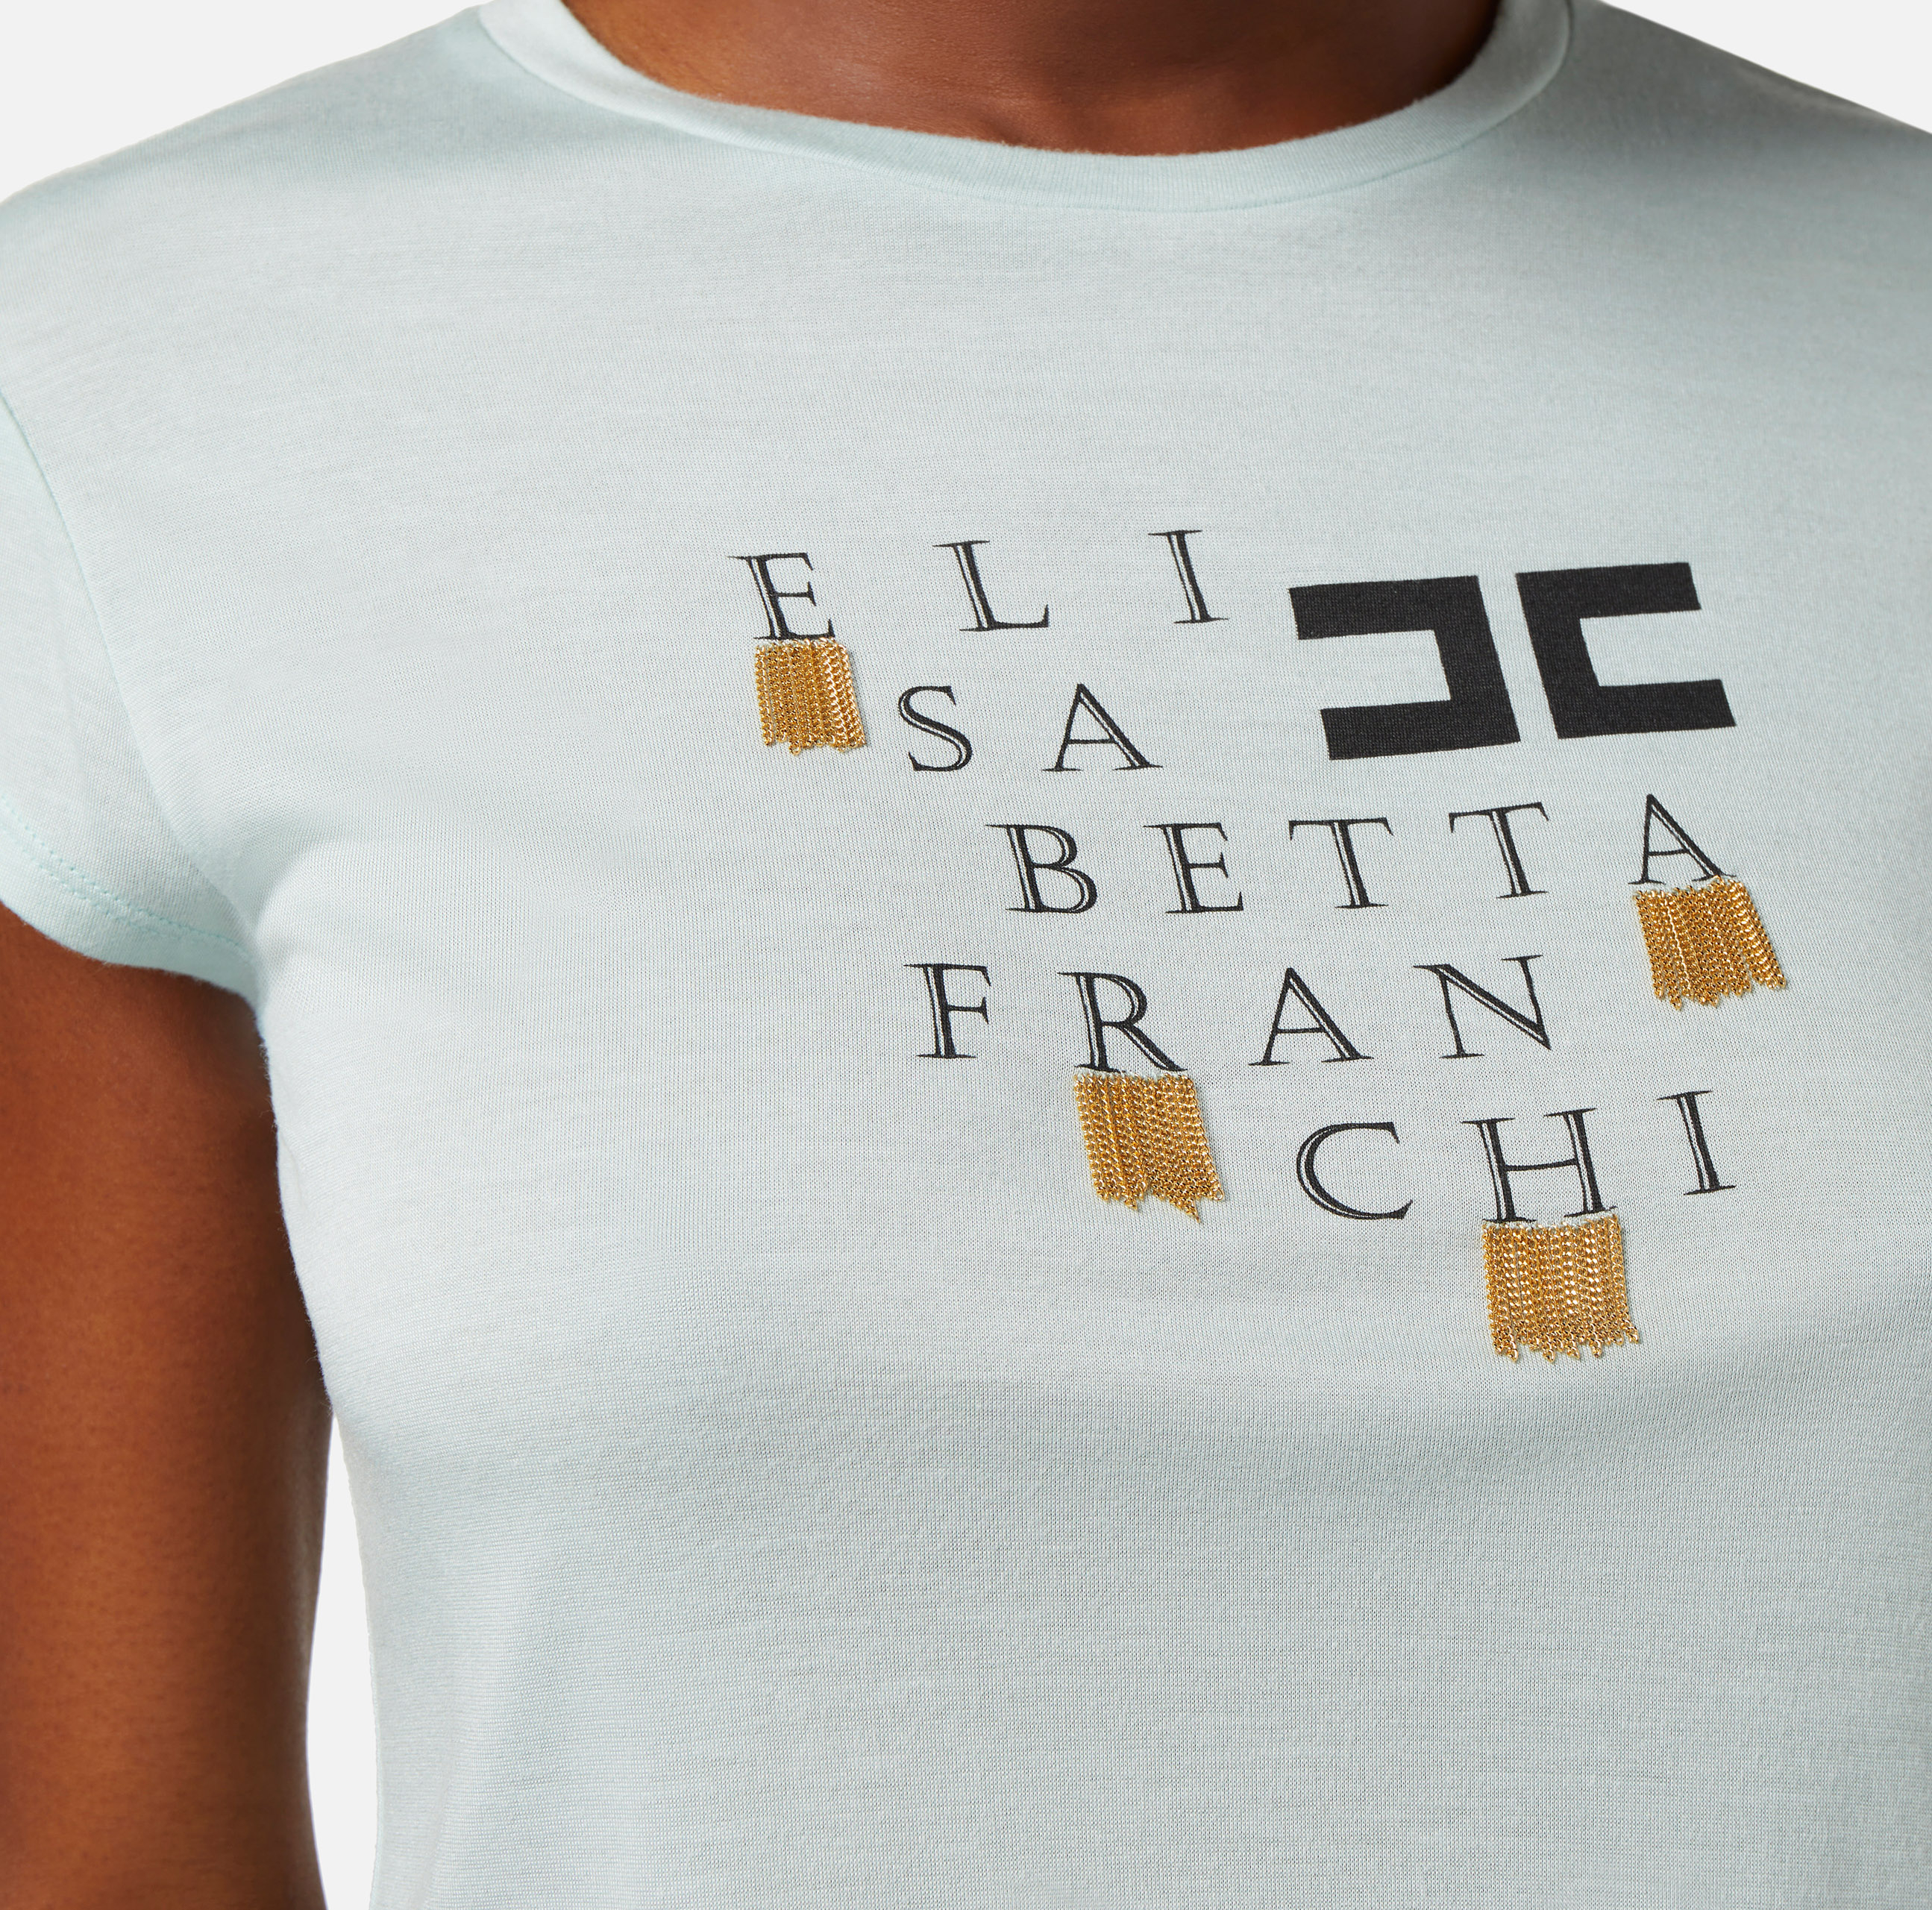 Jersey t-shirt with logo and fringes - Elisabetta Franchi